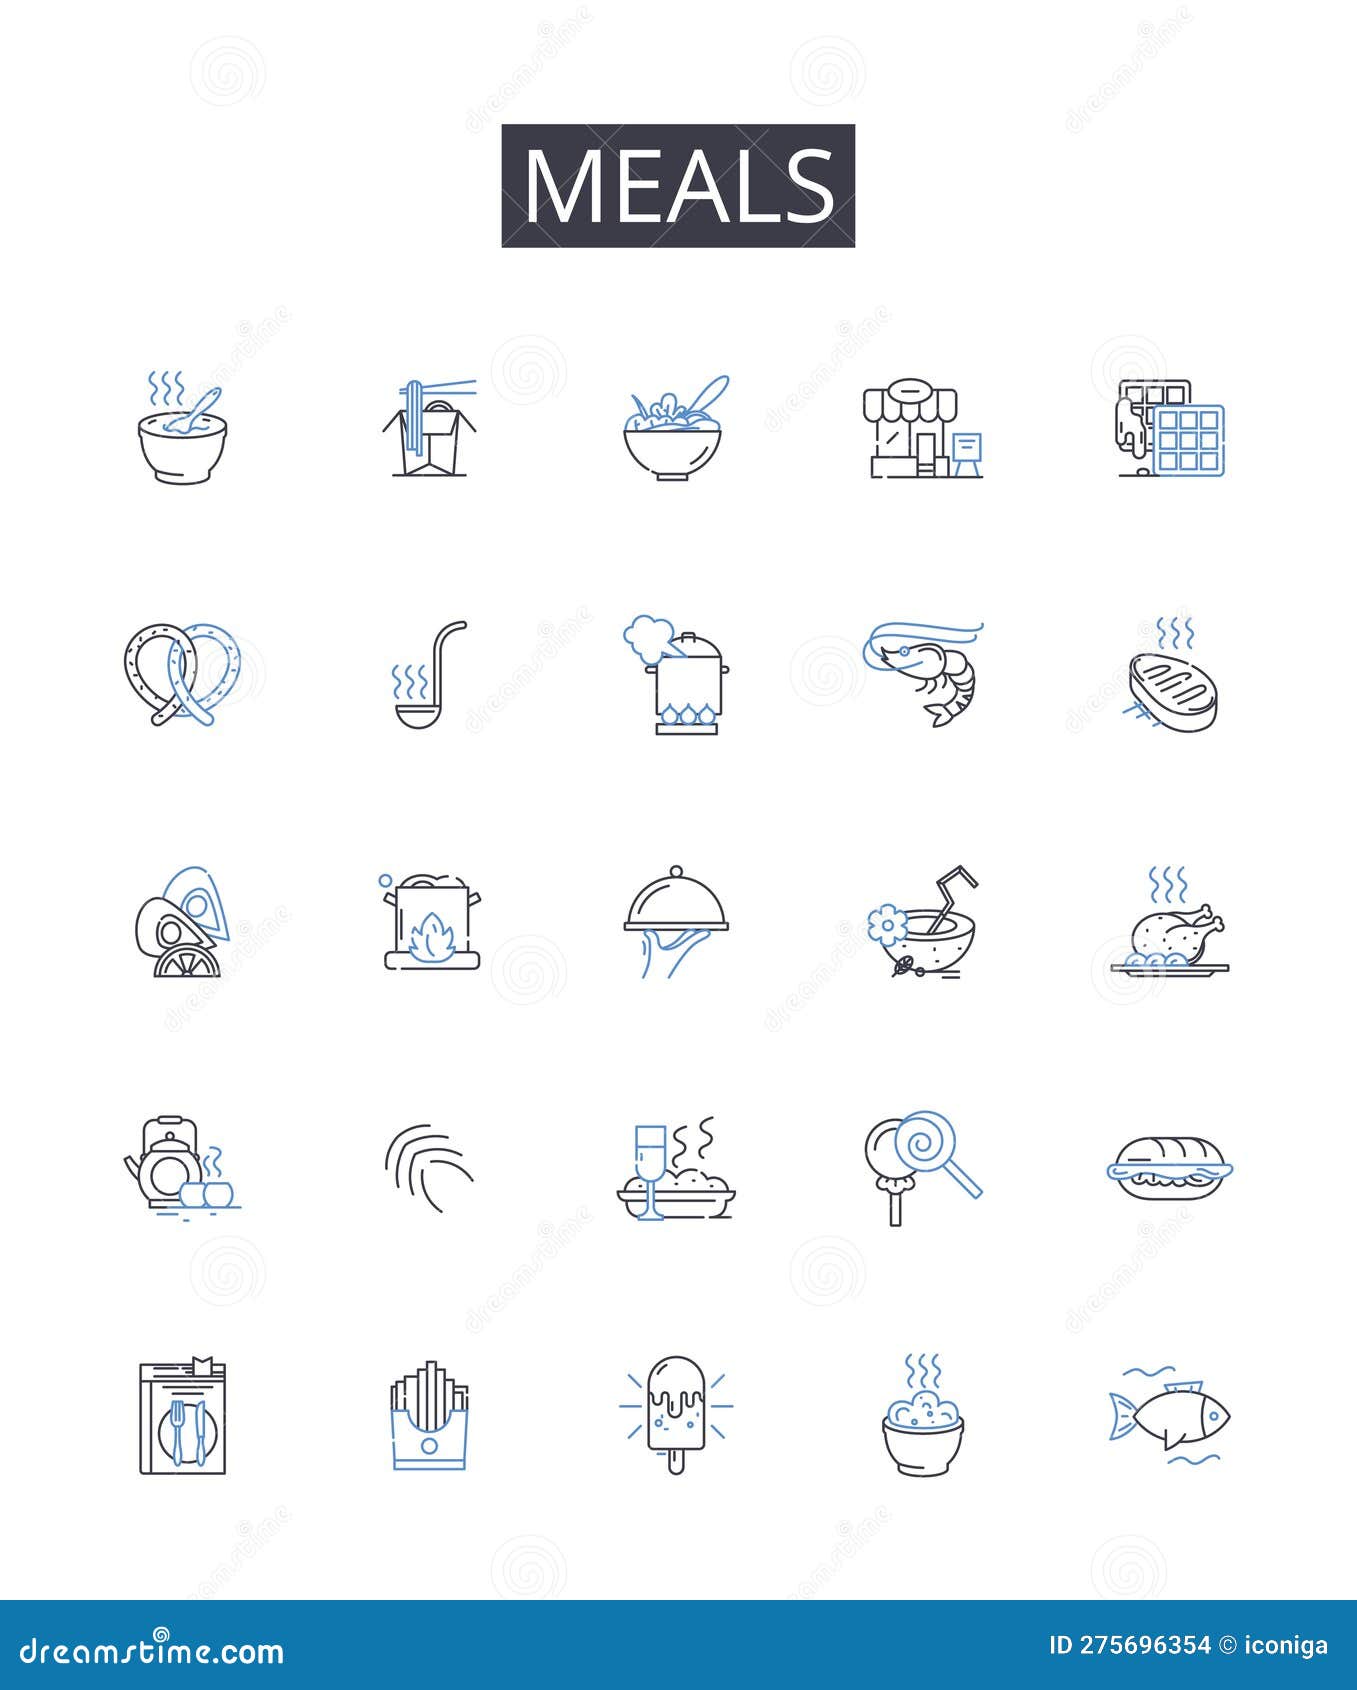 meals line icons collection. foodstuffs, grub, comestibles, cuisine, fare, victuals, provisions  and linear